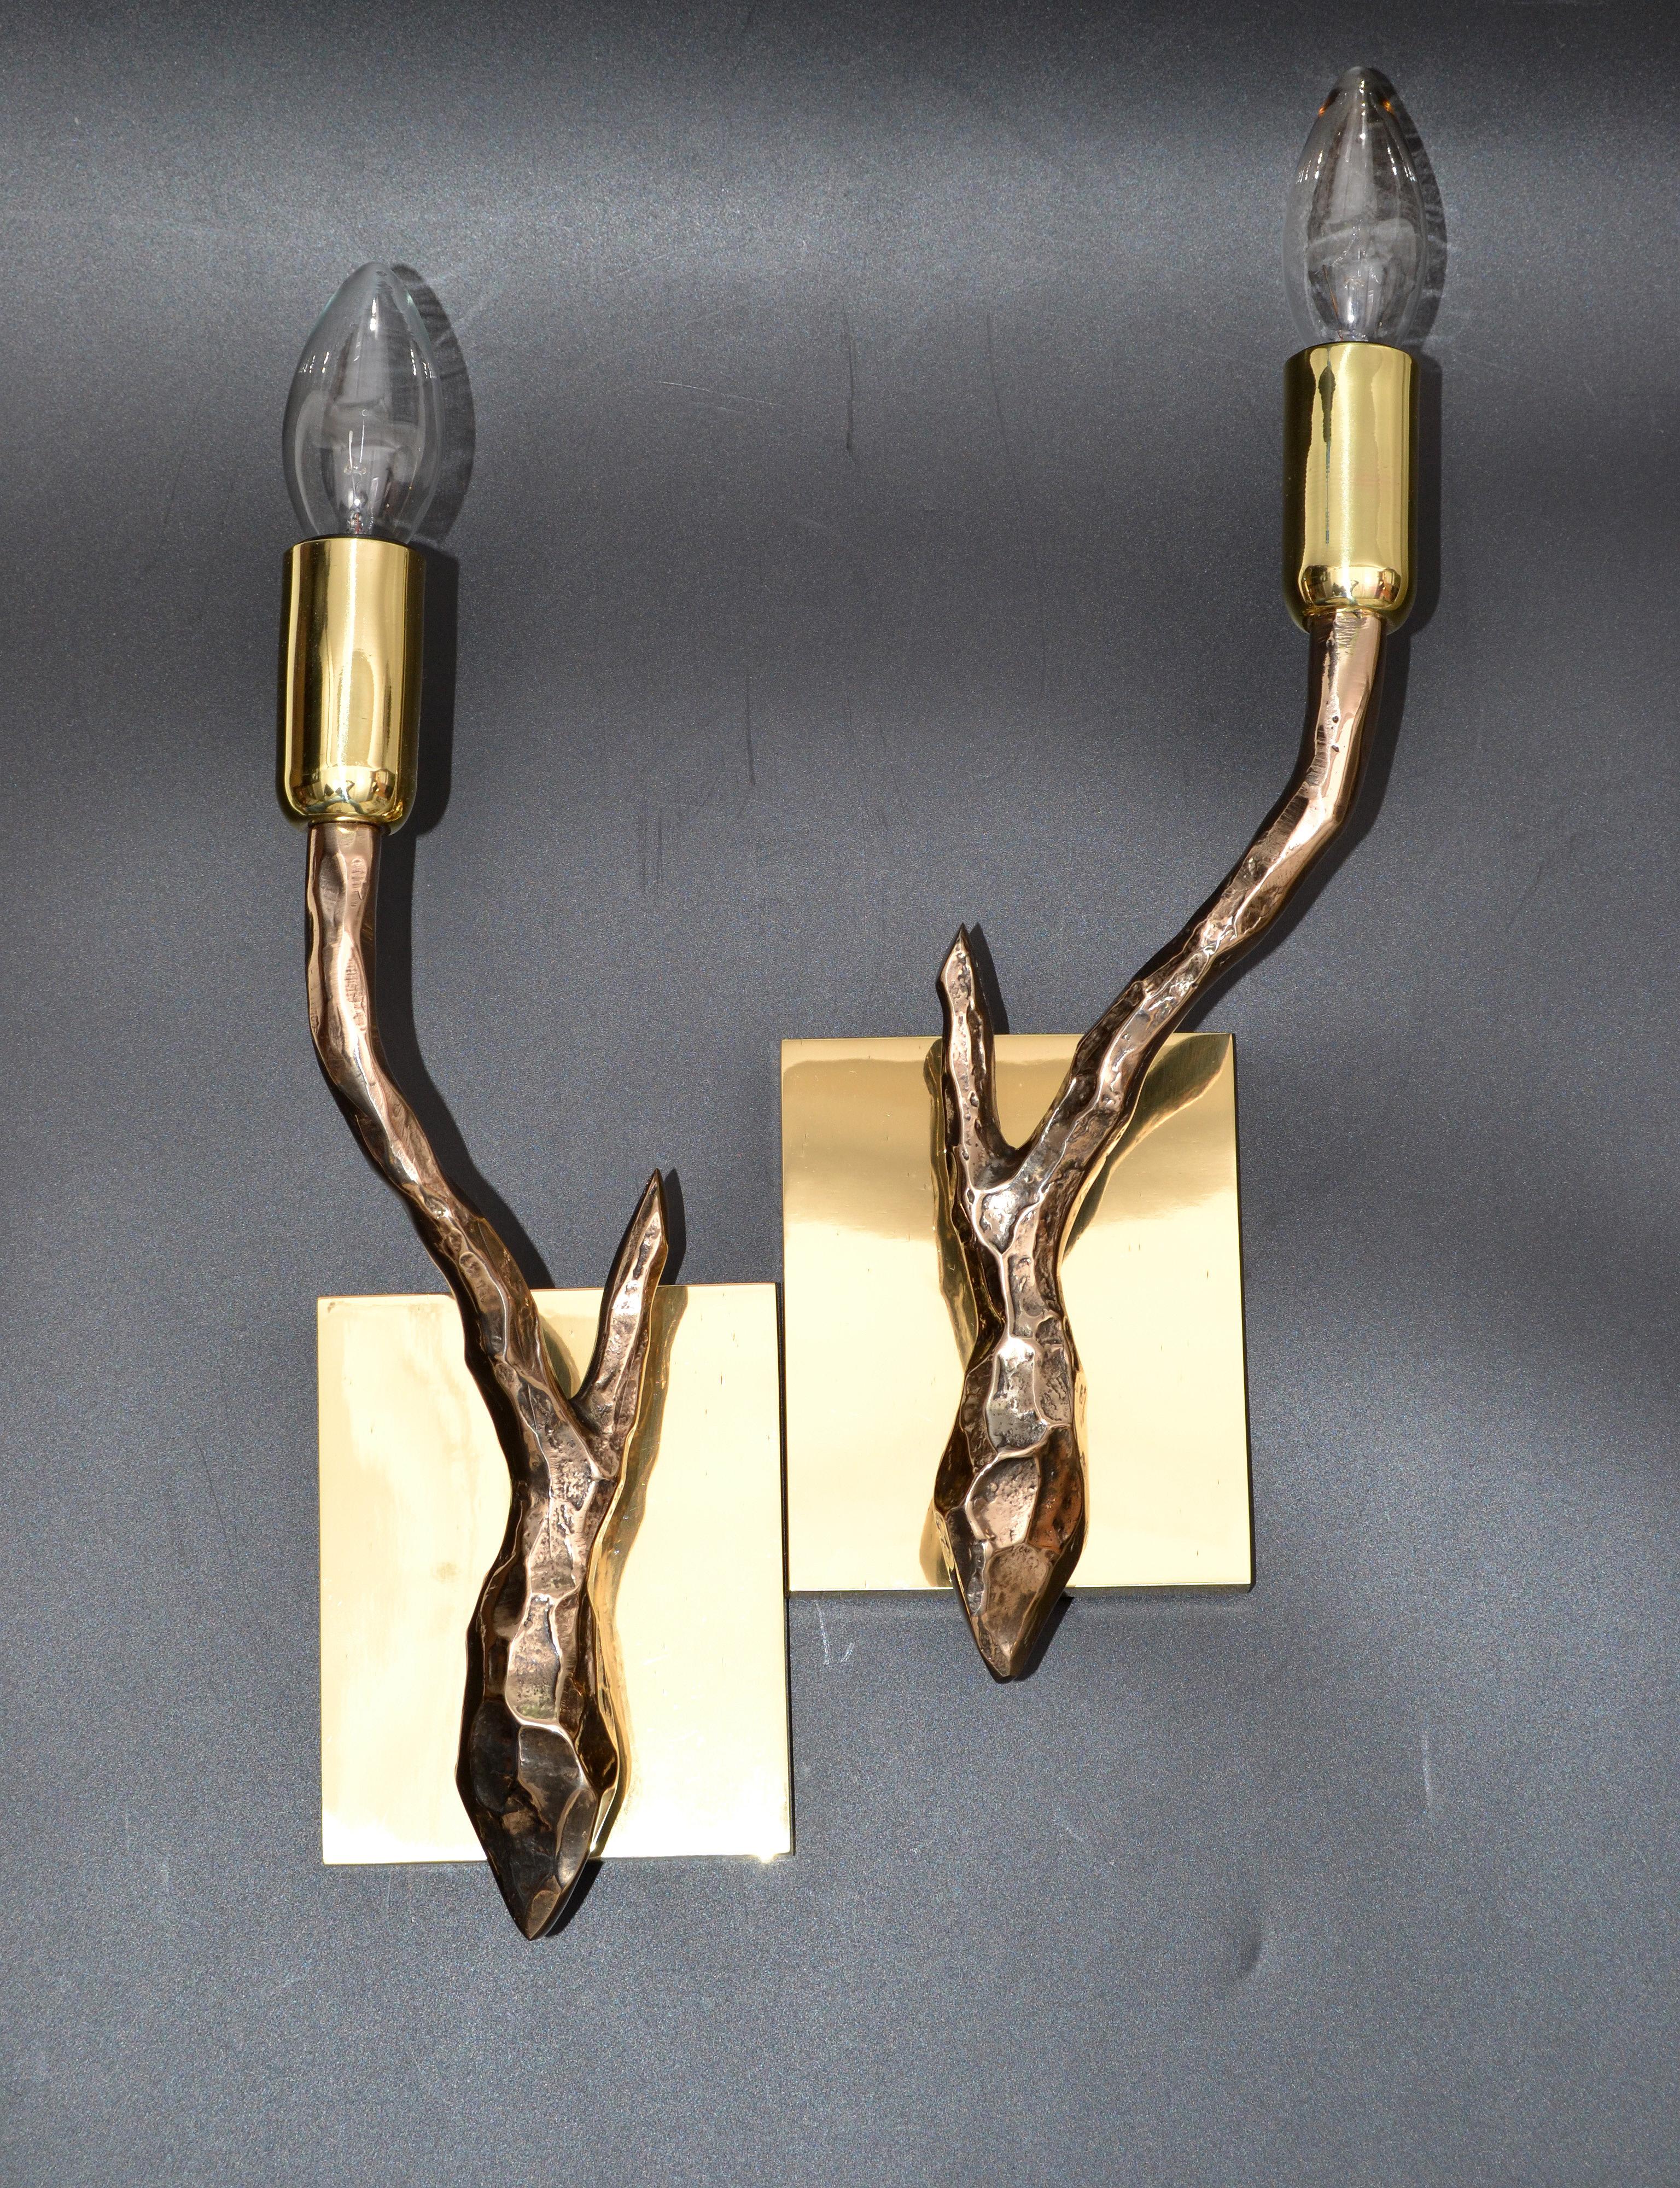 Pair of Agostini Style Sconces Bronze with Gold Metallic Shades, France, 1950s For Sale 2